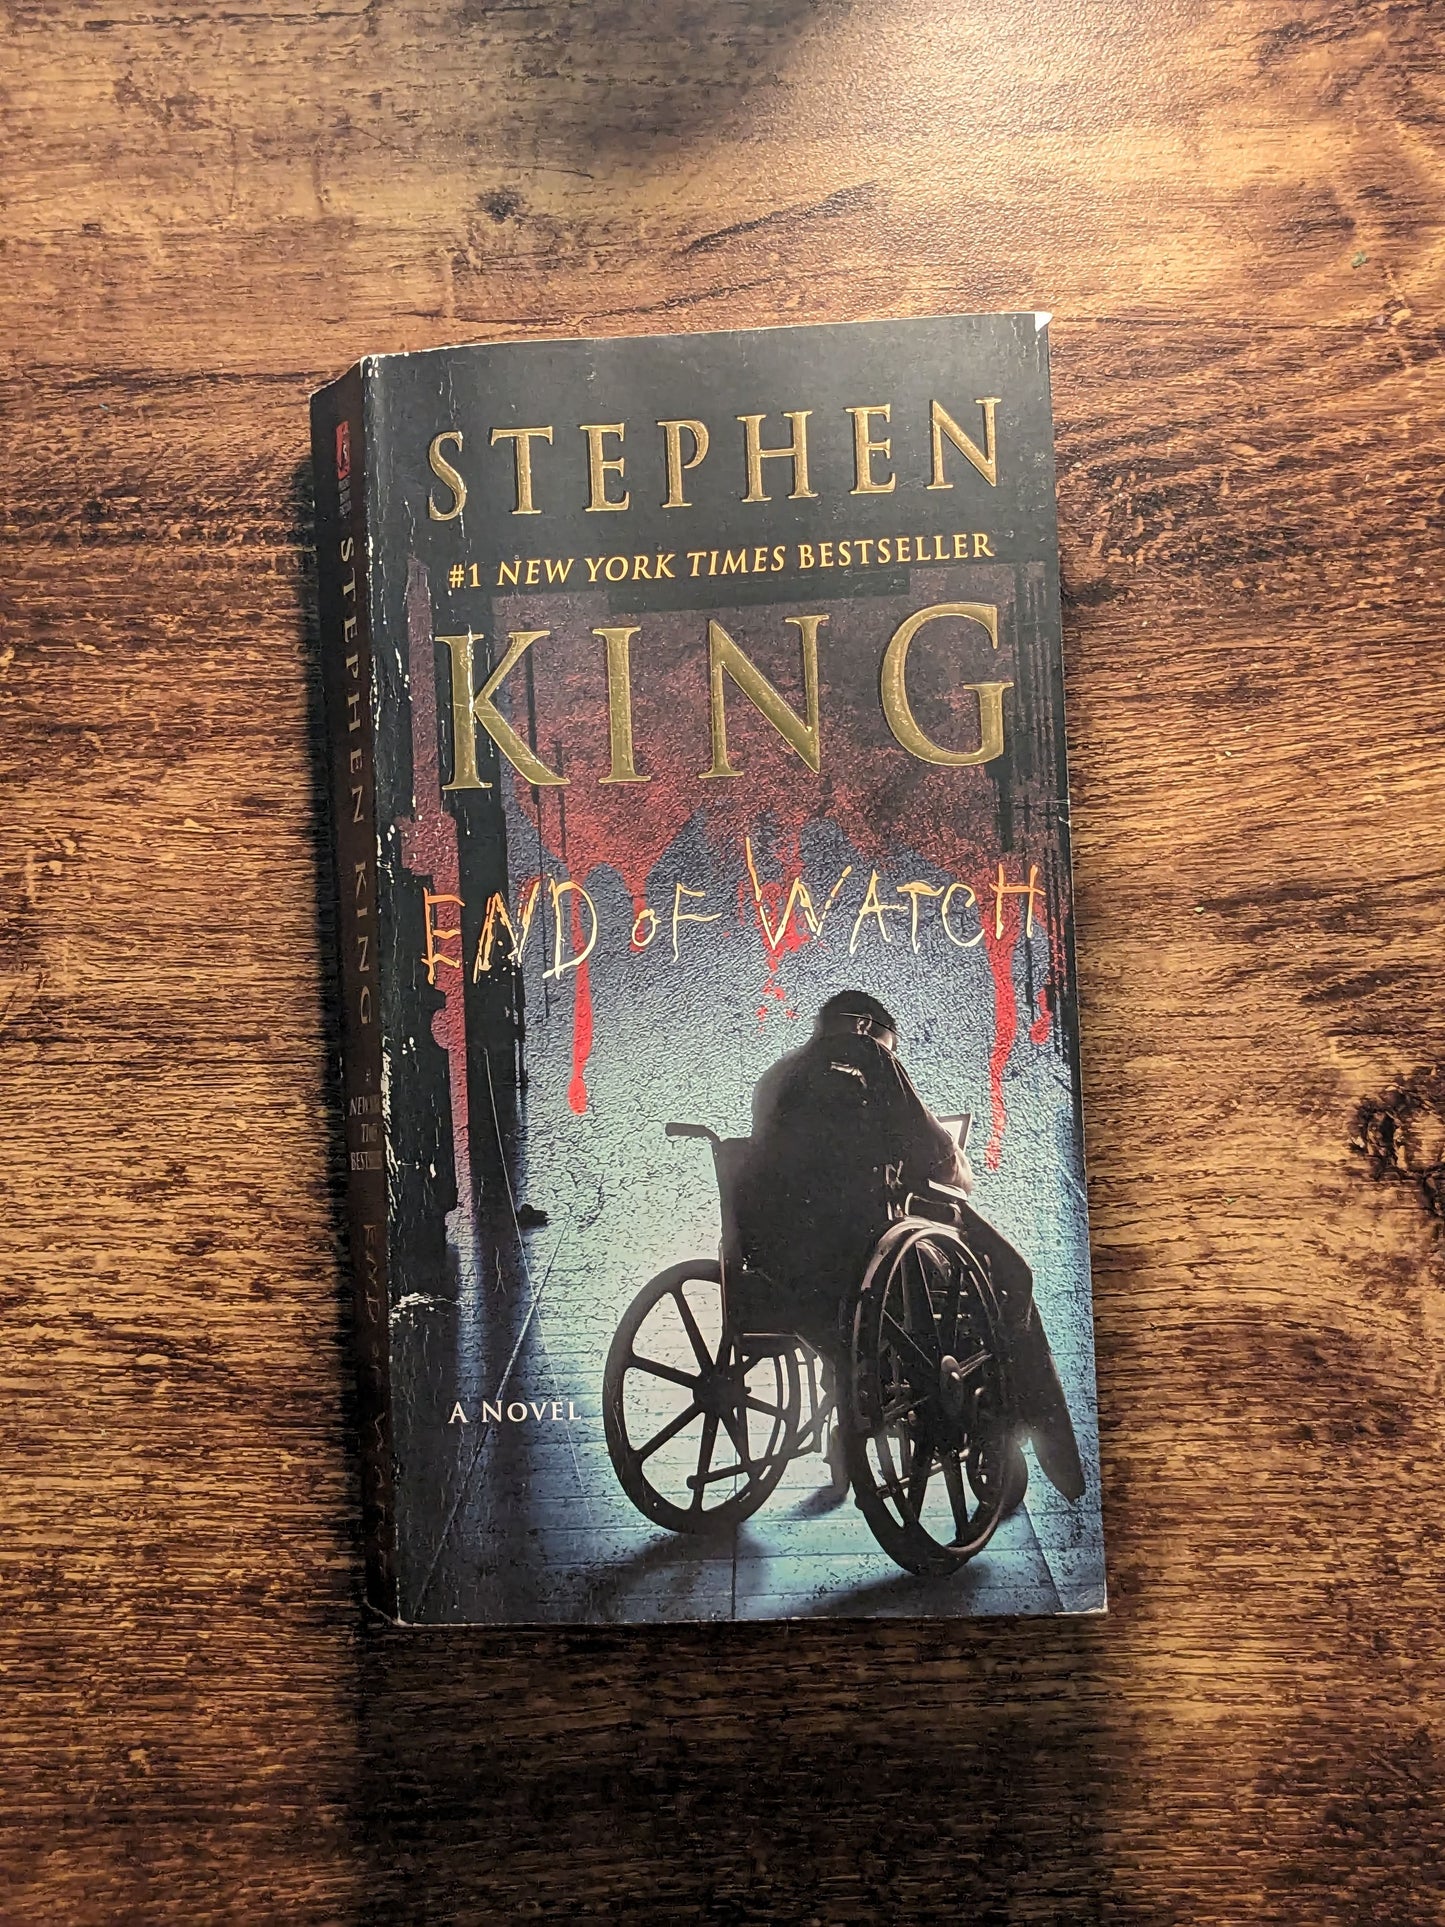 End of Watch (Bill Hodges Trilogy #3) Stephen King Paperback